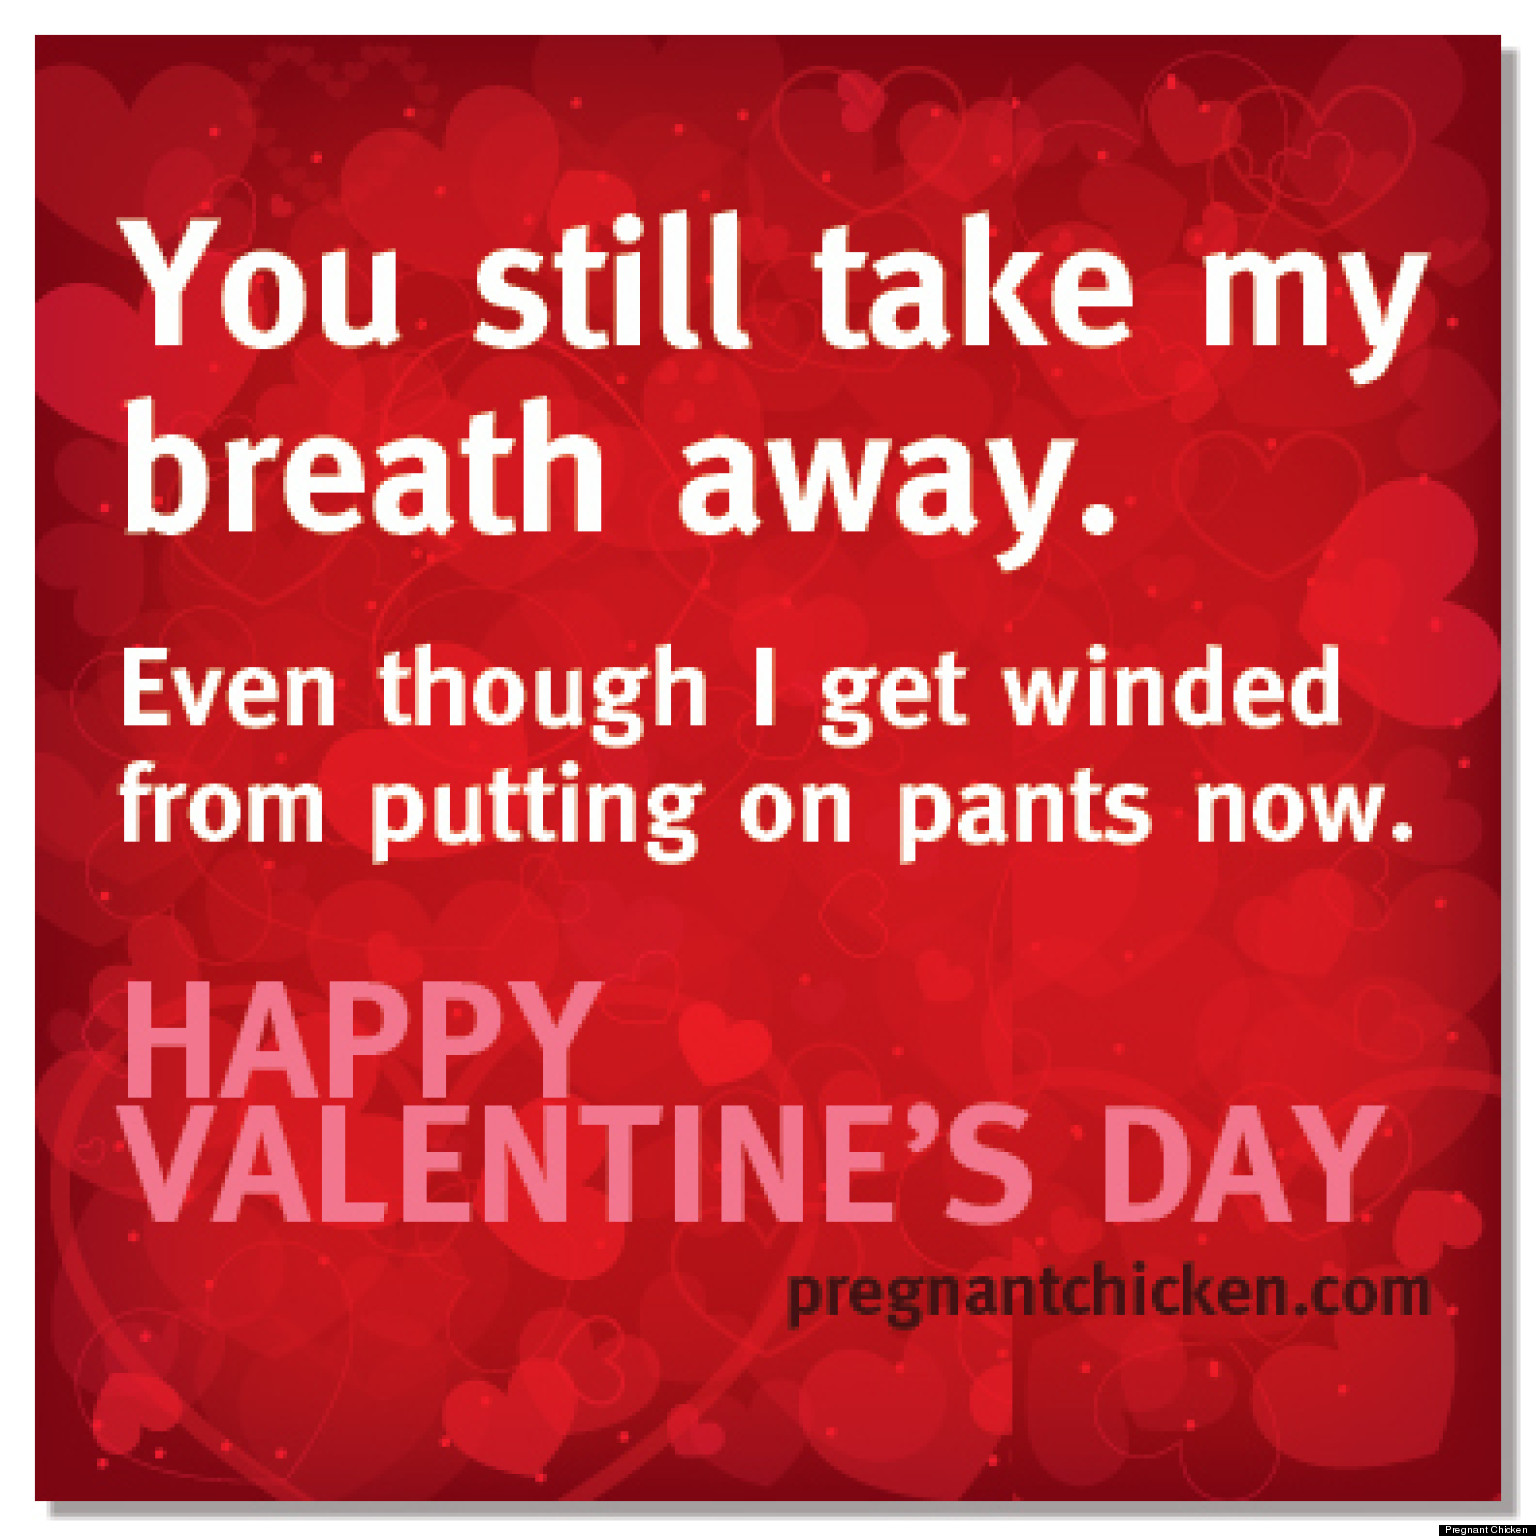 Funny Valentines For Pregnant Women To Give Their Partners (PHOTOS) | HuffPost1536 x 1536